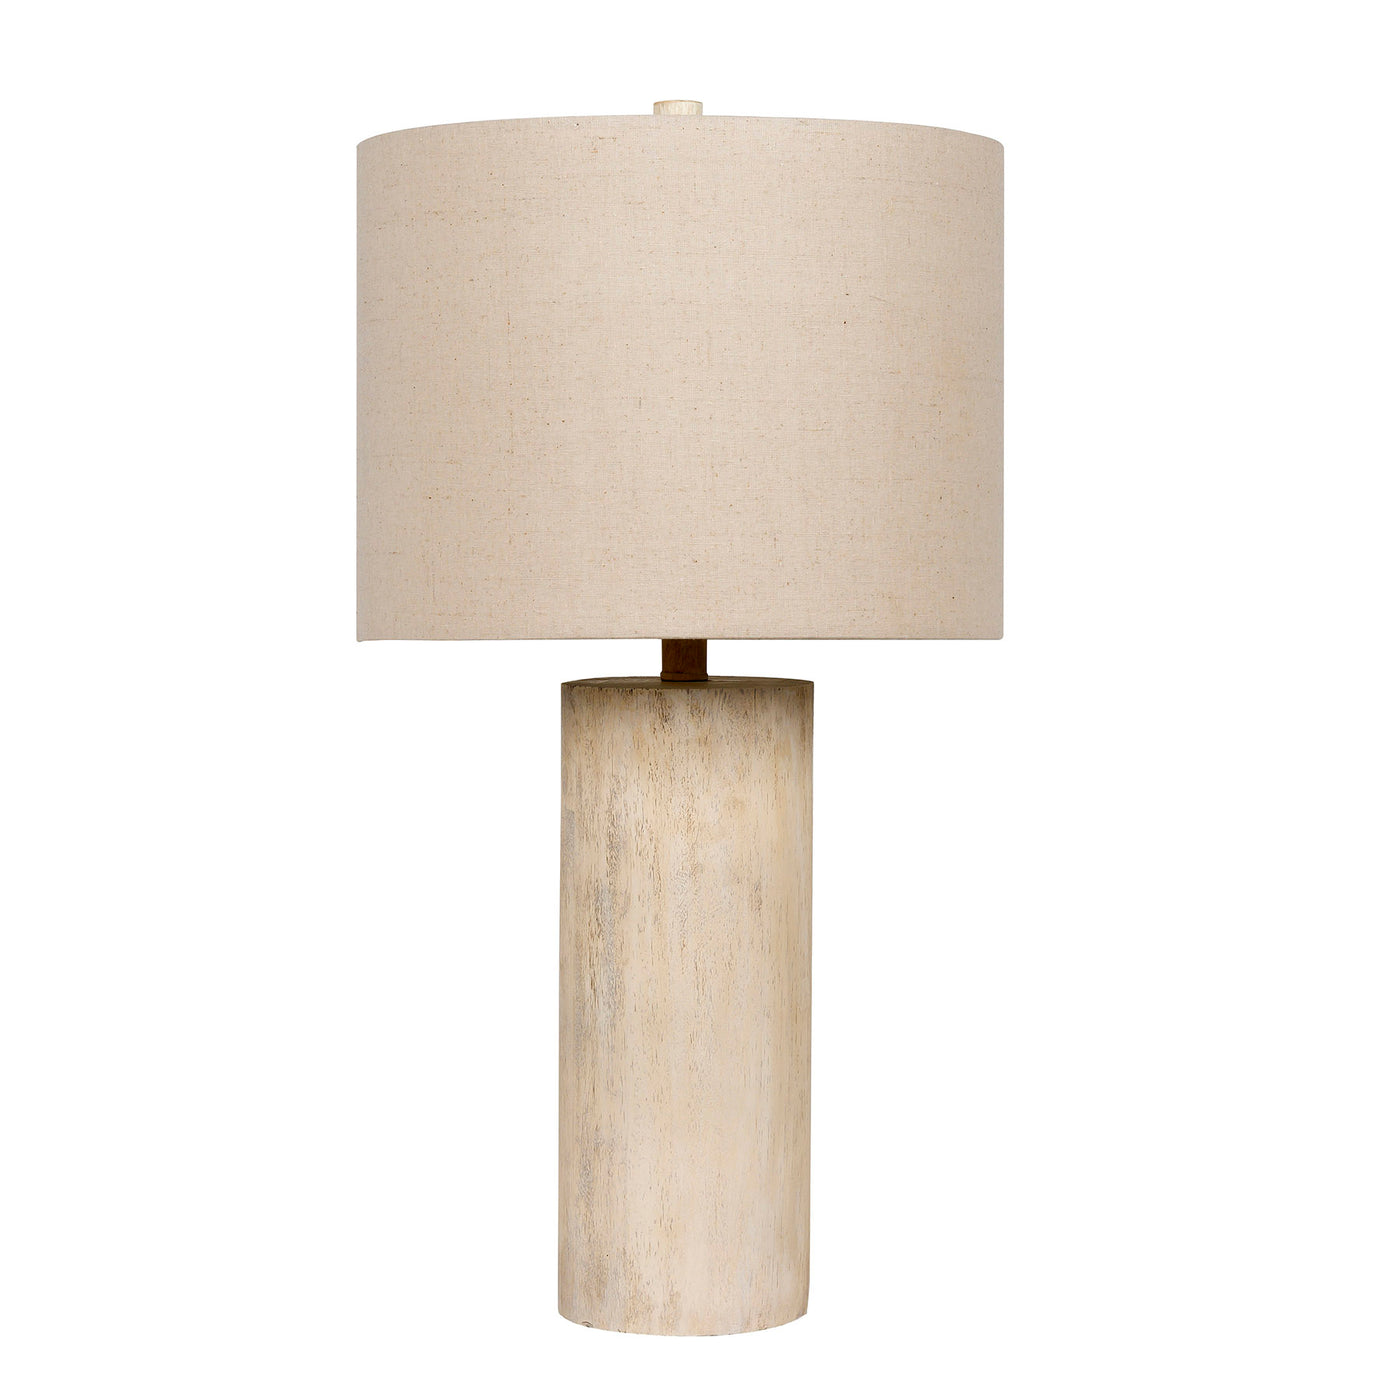 1 Light Poly Faux Wood Base Table Lamp